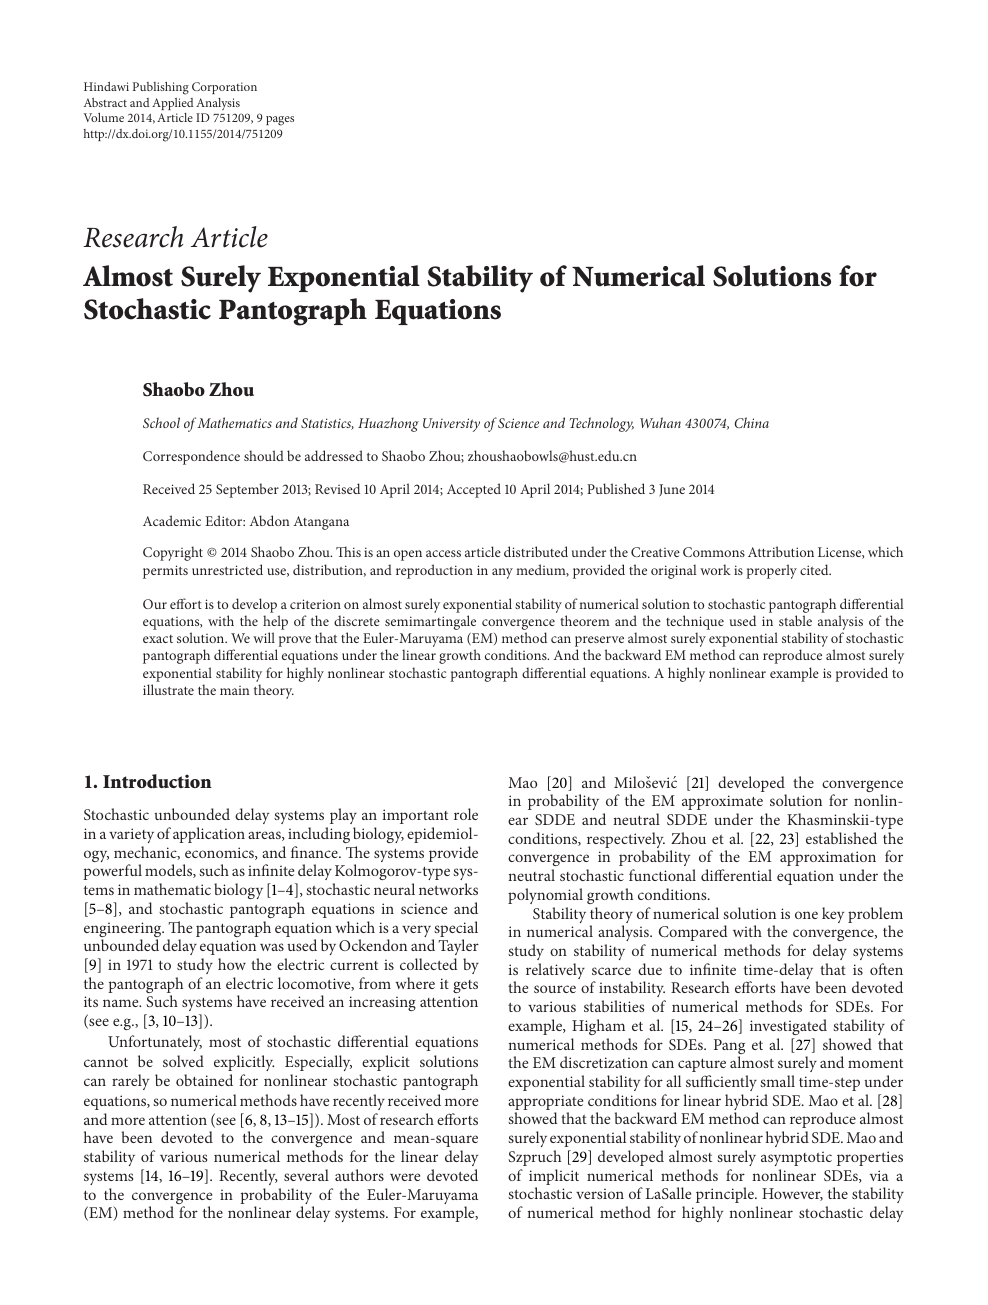 Almost Surely Exponential Stability Of Numerical Solutions For Stochastic Pantograph Equations Topic Of Research Paper In Mathematics Download Scholarly Article Pdf And Read For Free On Cyberleninka Open Science Hub